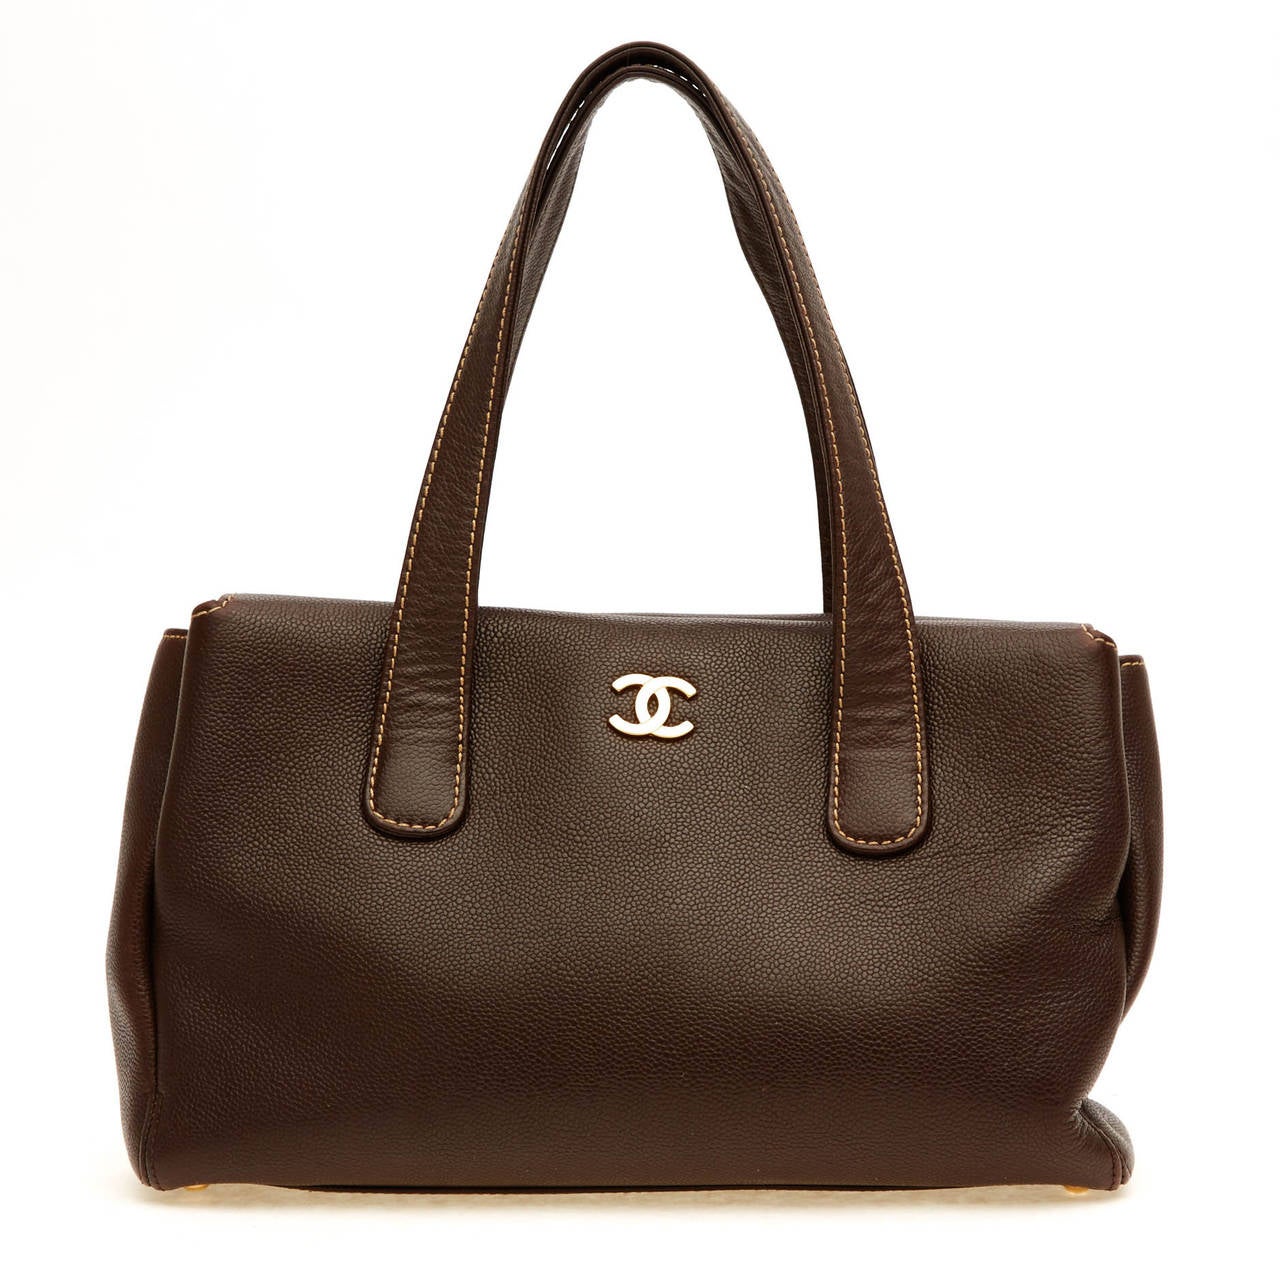 This beautifully understated Chanel Pebbled Leather Shoulder Bag is fit to be your essential everyday purse. It is constructed with soft pebbled chocolate brown leather and accented with gold tone hardware. It features the Chanel logo printed on the